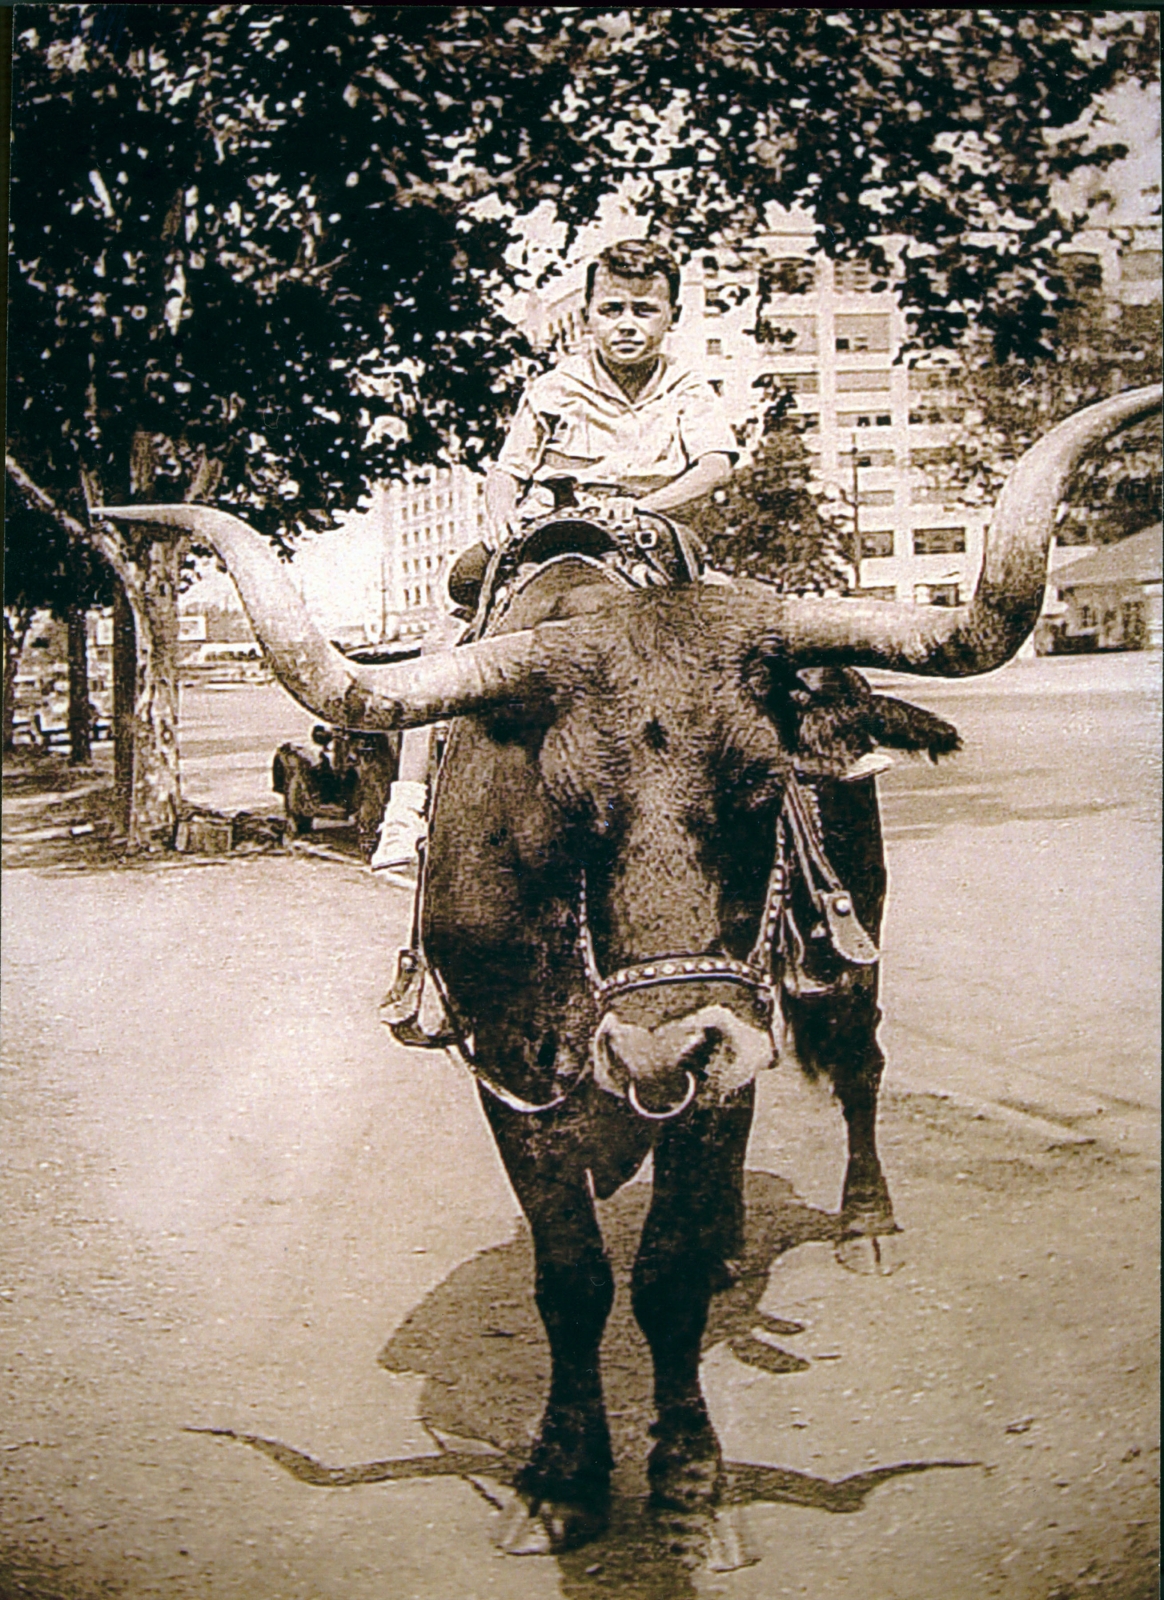 Robert Clark, age seven, on the back of a longhorn steer at the Frontier Centennial Exposition, Fort Worth, Texas, 1936